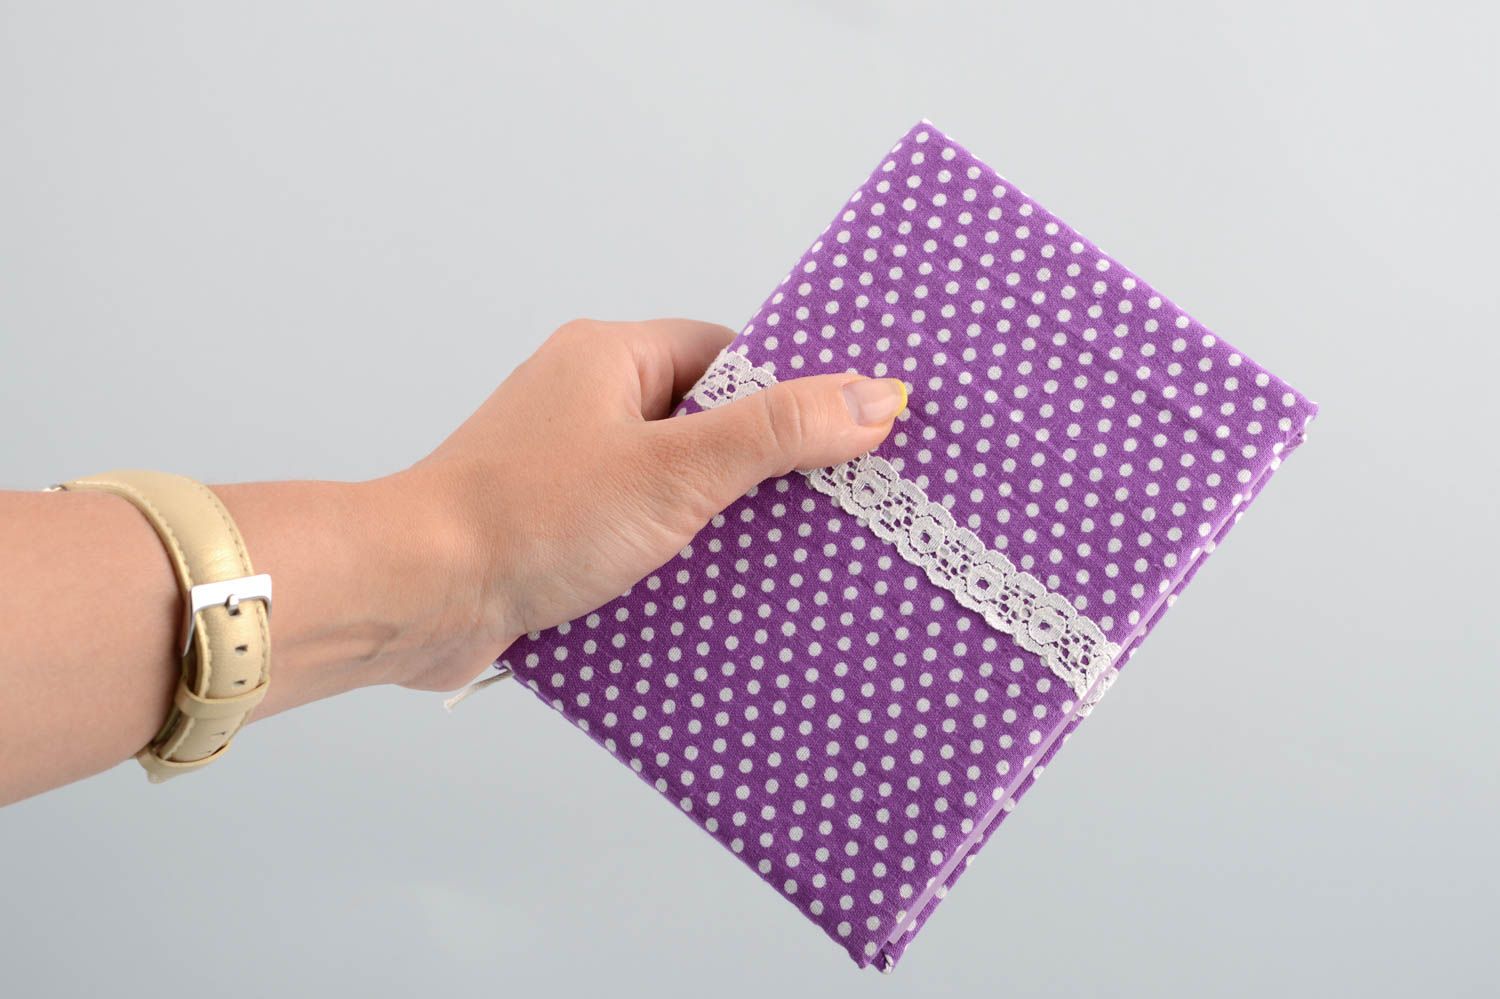 Handmade designer notebook with bright violet polka dot fabric cover with lace photo 5